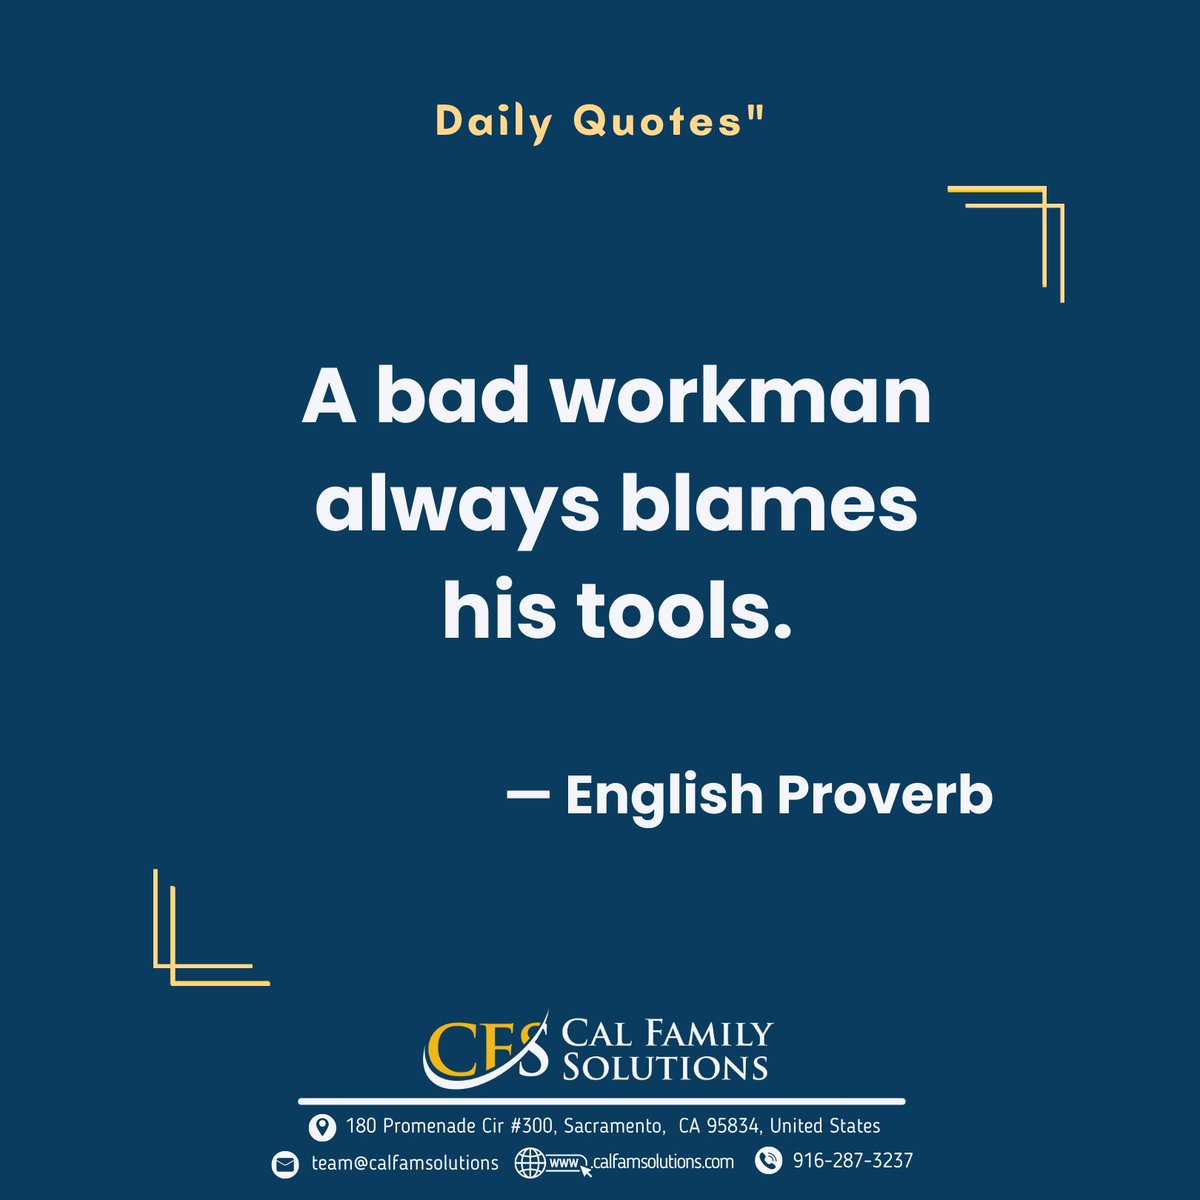 A bad workman always blames his tools. — English Proverb 👎👷‍♂️🔪⚒️
#SelfAccountability #NoExcuses #PersonalGrowth #Responsibility #divorcesupport #divorcerecovery #divorcecoach #relationship #woman #Dailyquote #instaquote #momlife #DivorceLawyer #DivorceAttorney #DivorceSurvivor